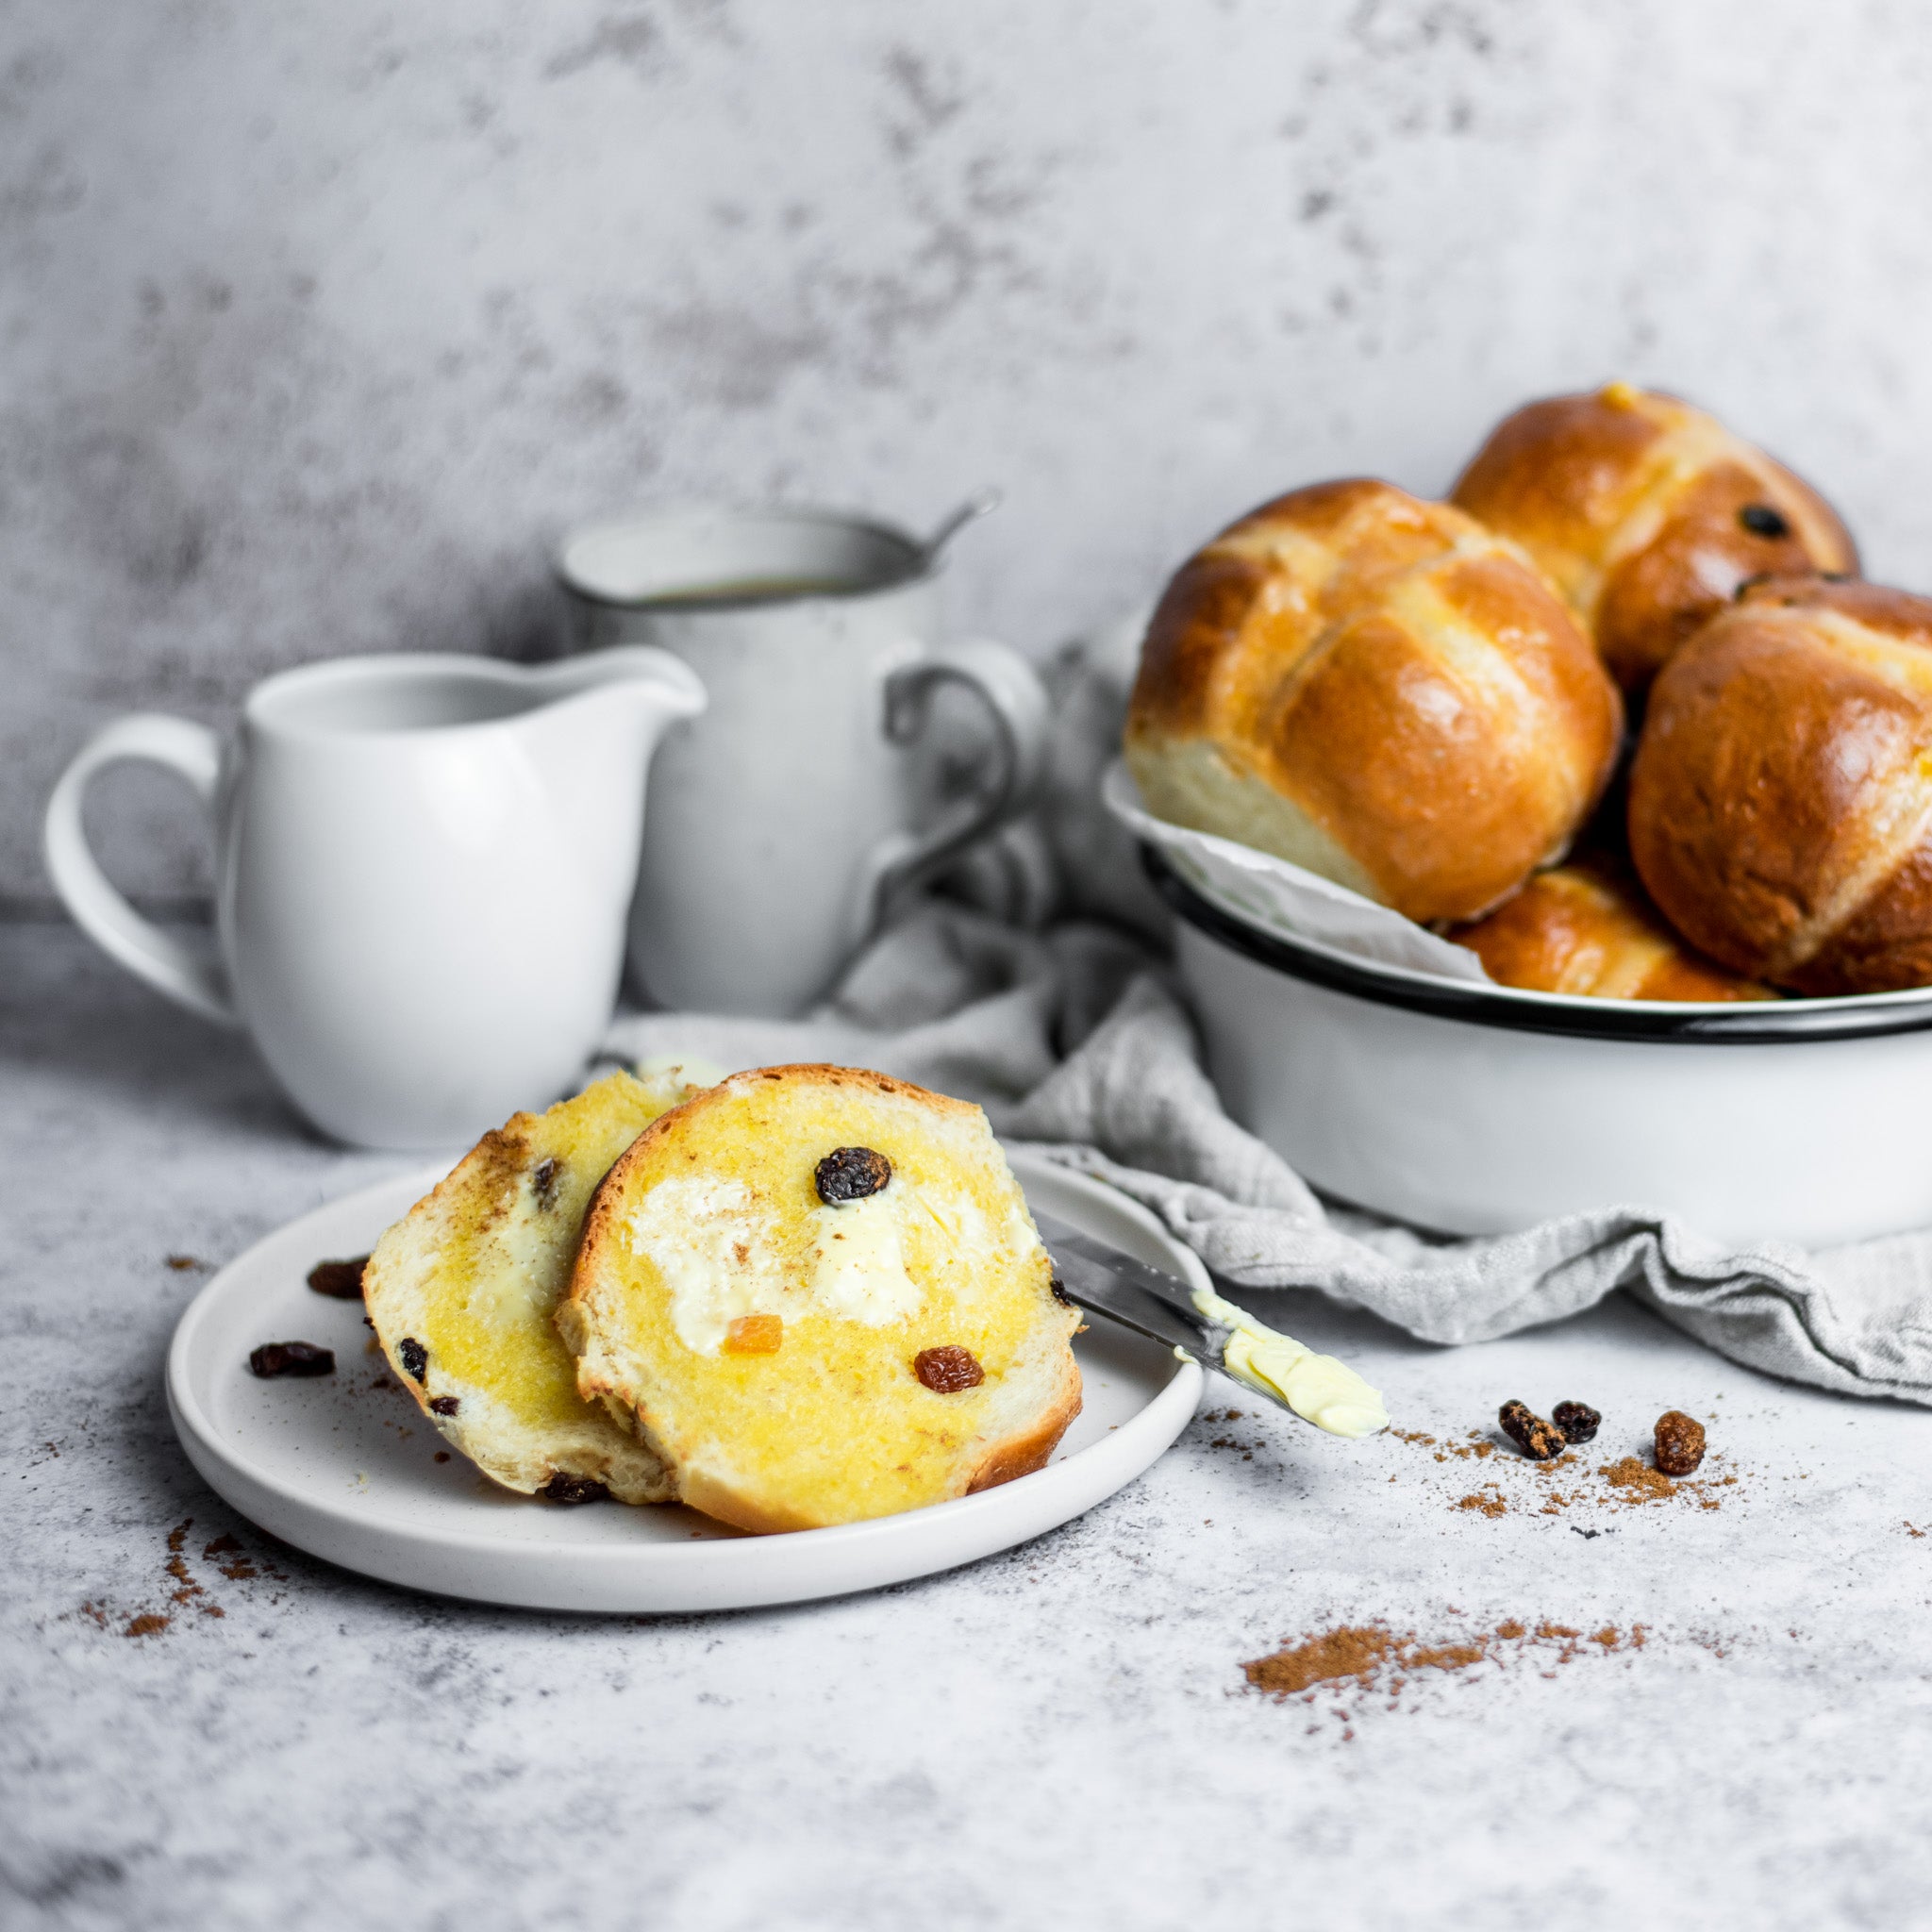 Buttered hot cross buns on a white plate next to a milk jug